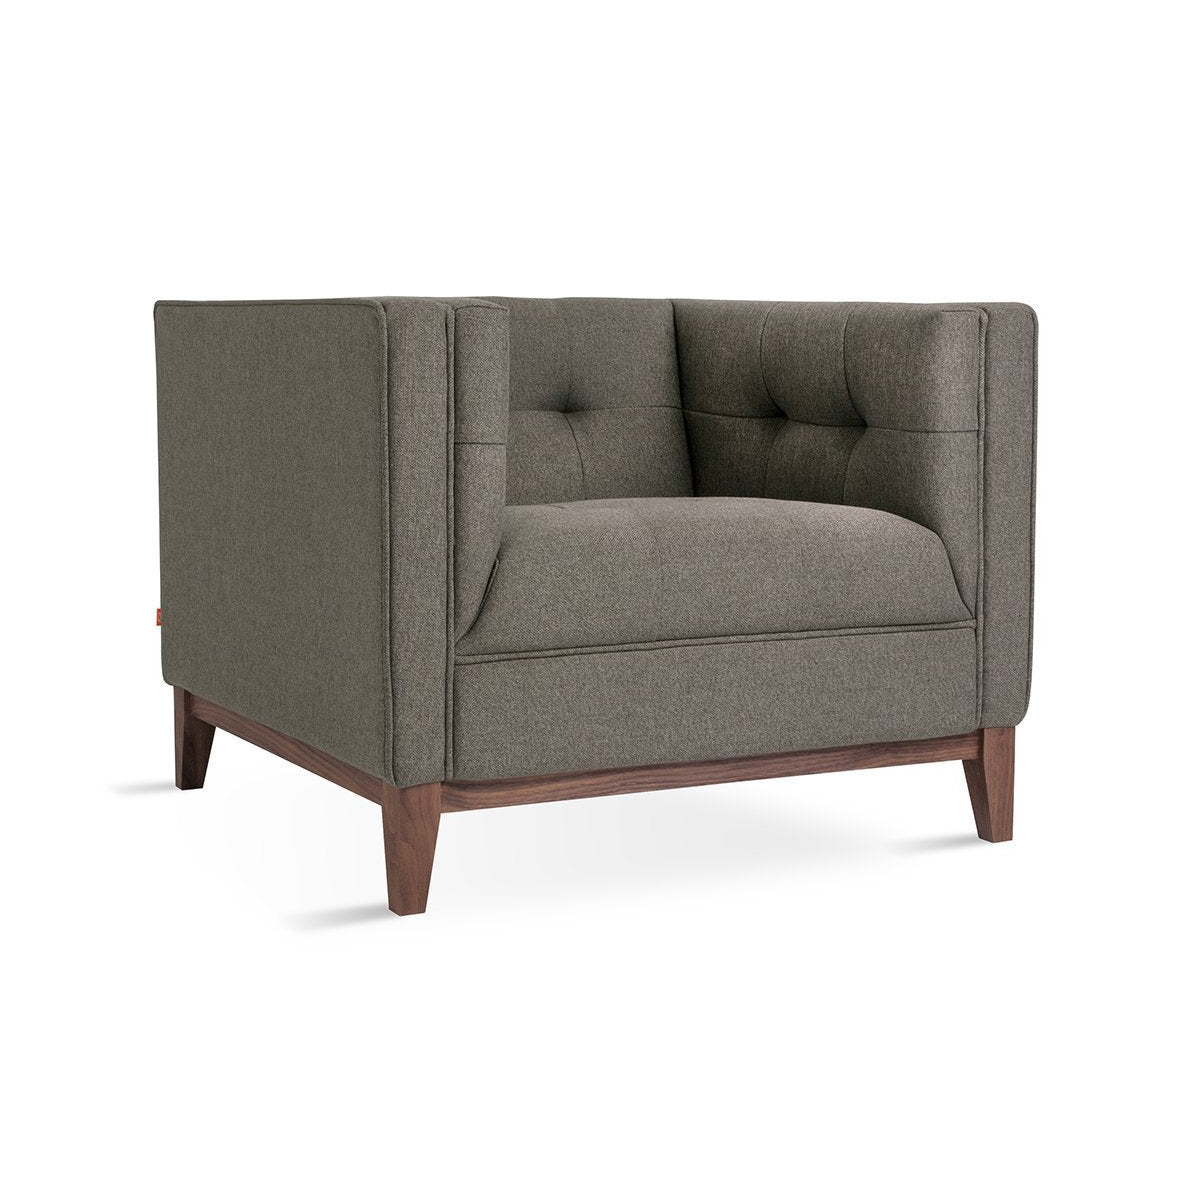 Load image into Gallery viewer, Atwood Chair Bayview OspreyLounge Chair Gus*  Bayview Osprey   Four Hands, Burke Decor, Mid Century Modern Furniture, Old Bones Furniture Company, Old Bones Co, Modern Mid Century, Designer Furniture, https://www.oldbonesco.com/
